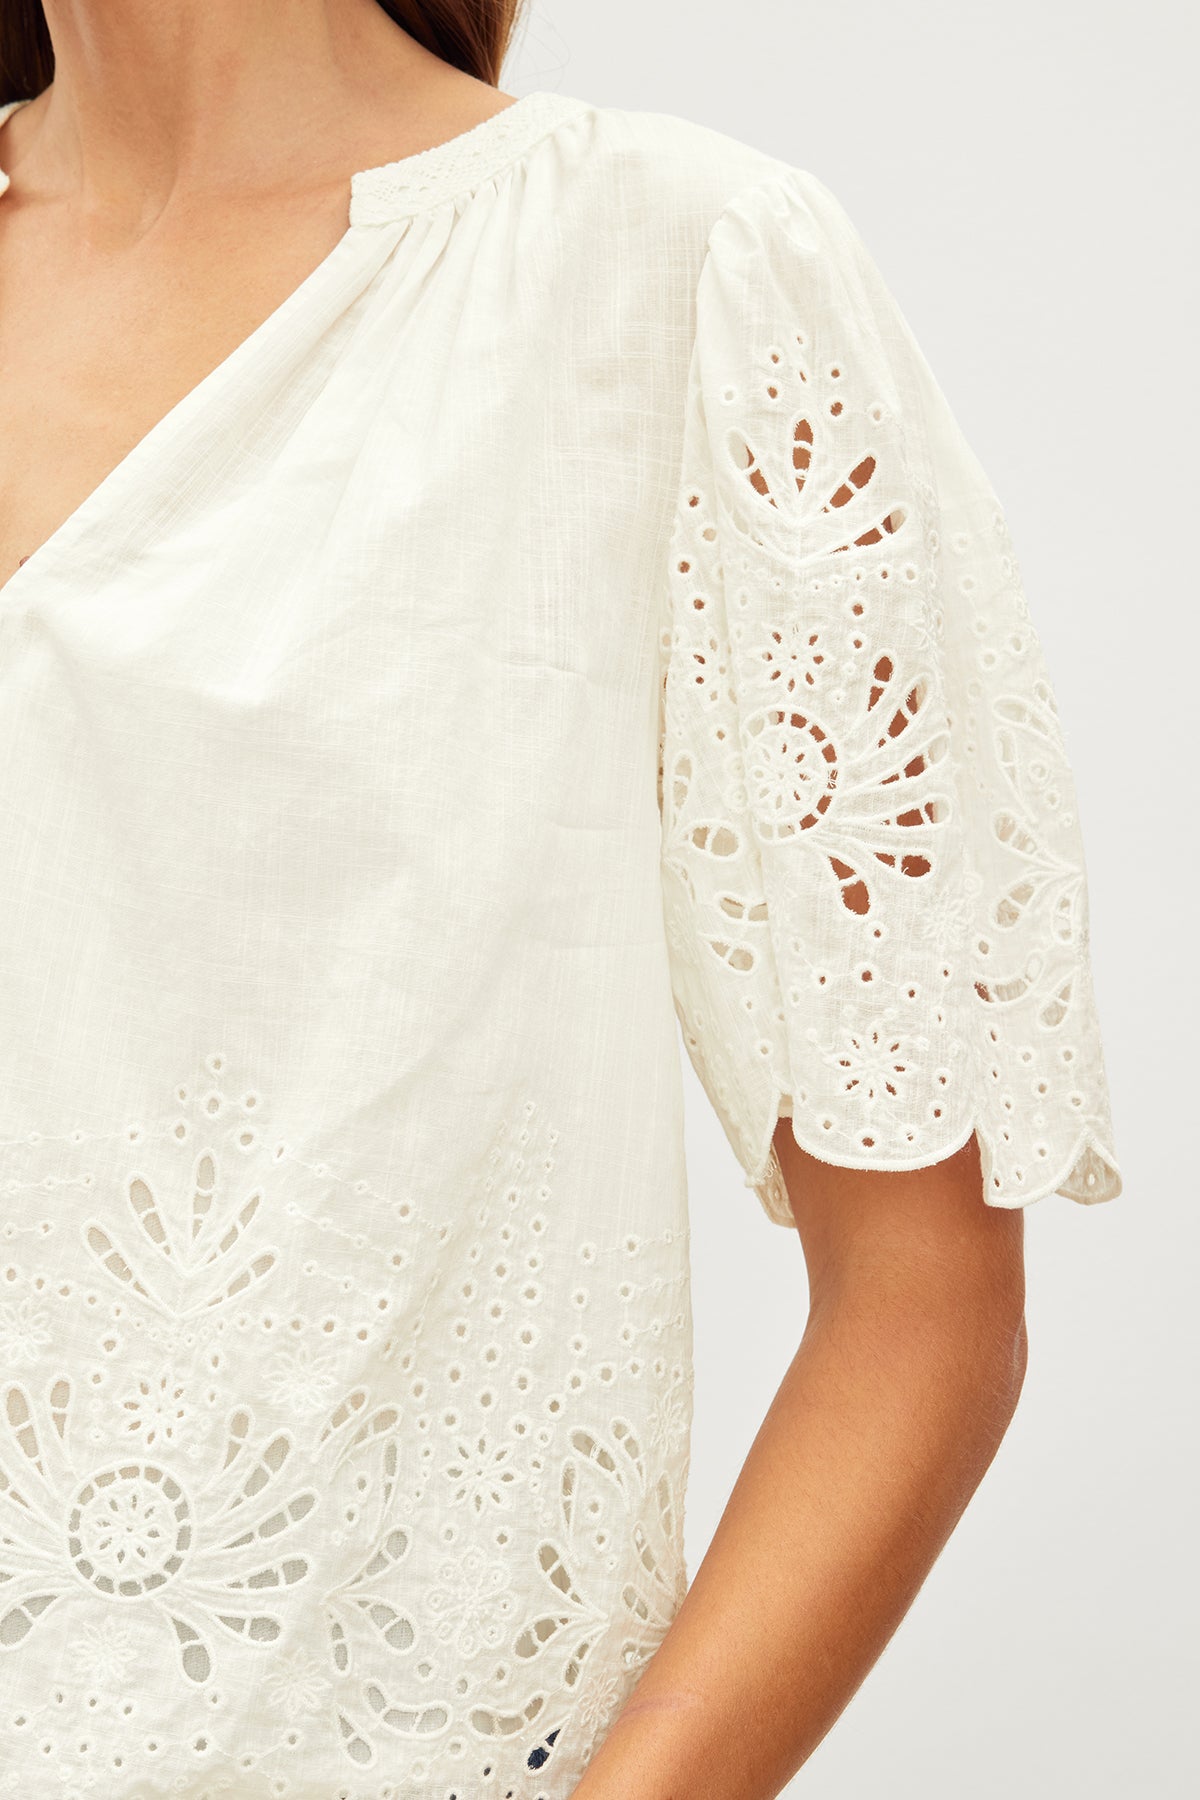   Close-up of a woman's shoulder and arm wearing a Velvet by Graham & Spencer Razi Embroidered Cotton Lace Top with cut-out patterns on the sleeve. 